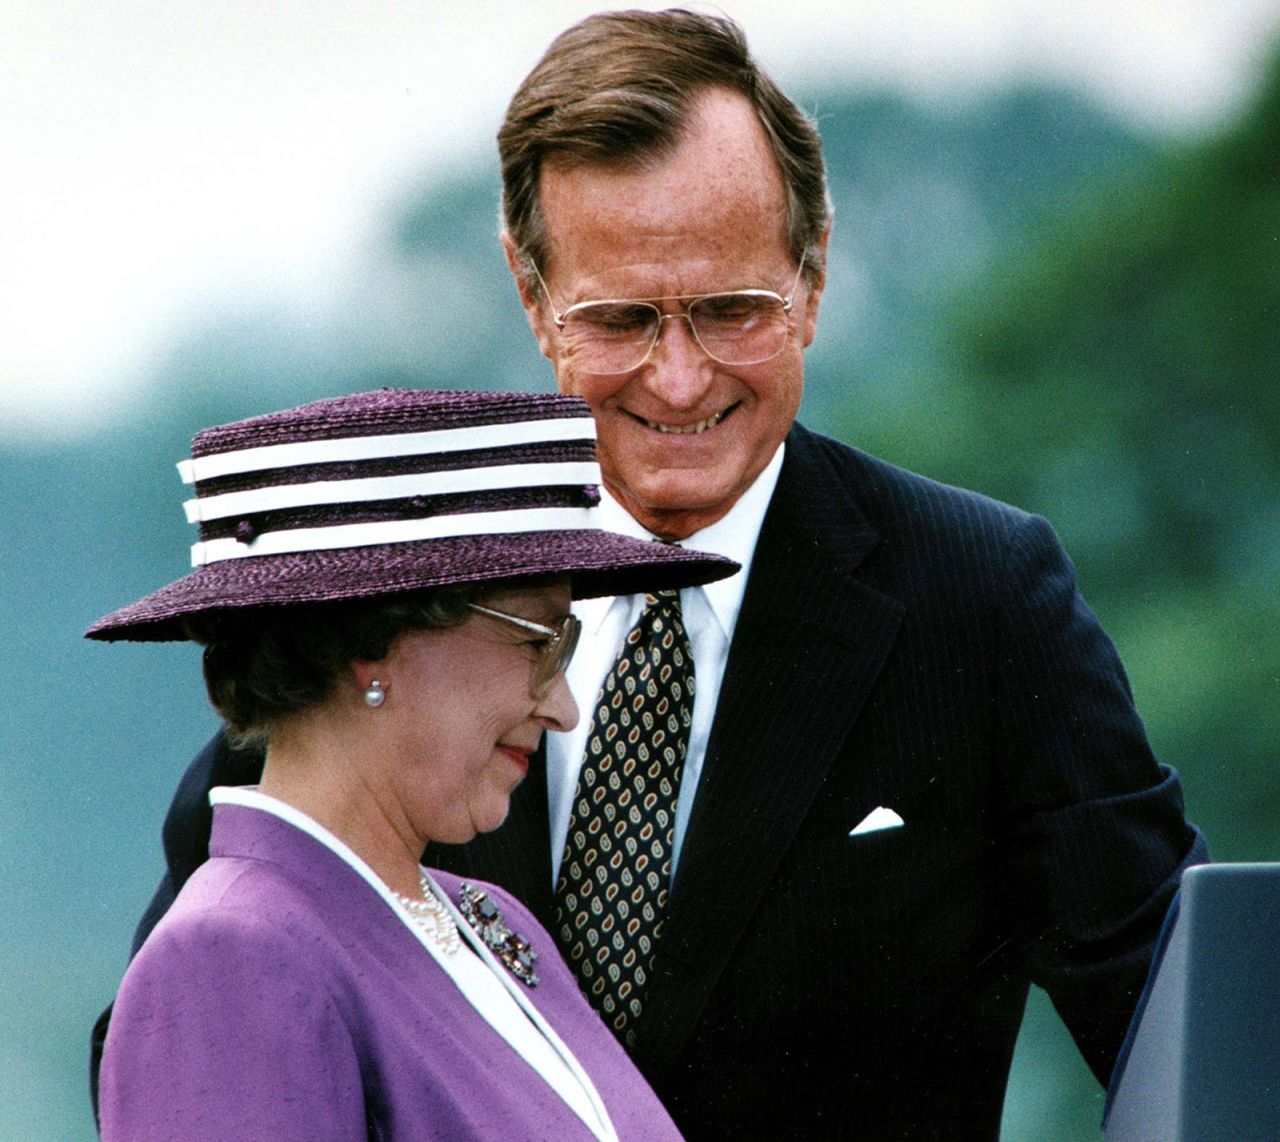 <strong>George H.W. Bush:</strong> Bush visited the Queen at Buckingham Palace in 1989, and in May 1991, she was guest of honor at a state dinner in the White House. The pair exchanged toasts about the legacy of human rights and the rule of law bequeathed upon the United States by Great Britain. Meanwhile, the Queen spoke about her previous visits to the White House and the history of diplomatic relations between the two countries. Bush said during his welcome address: "We have got a lot of things in common. Americans share the Queen's love for horses. ... Most of all what links our countries is less a place than an idea. The idea that for nearly 400 years has been America's inheritance and England's bequest: the legacy of democracy, the rule of law and basic human rights."